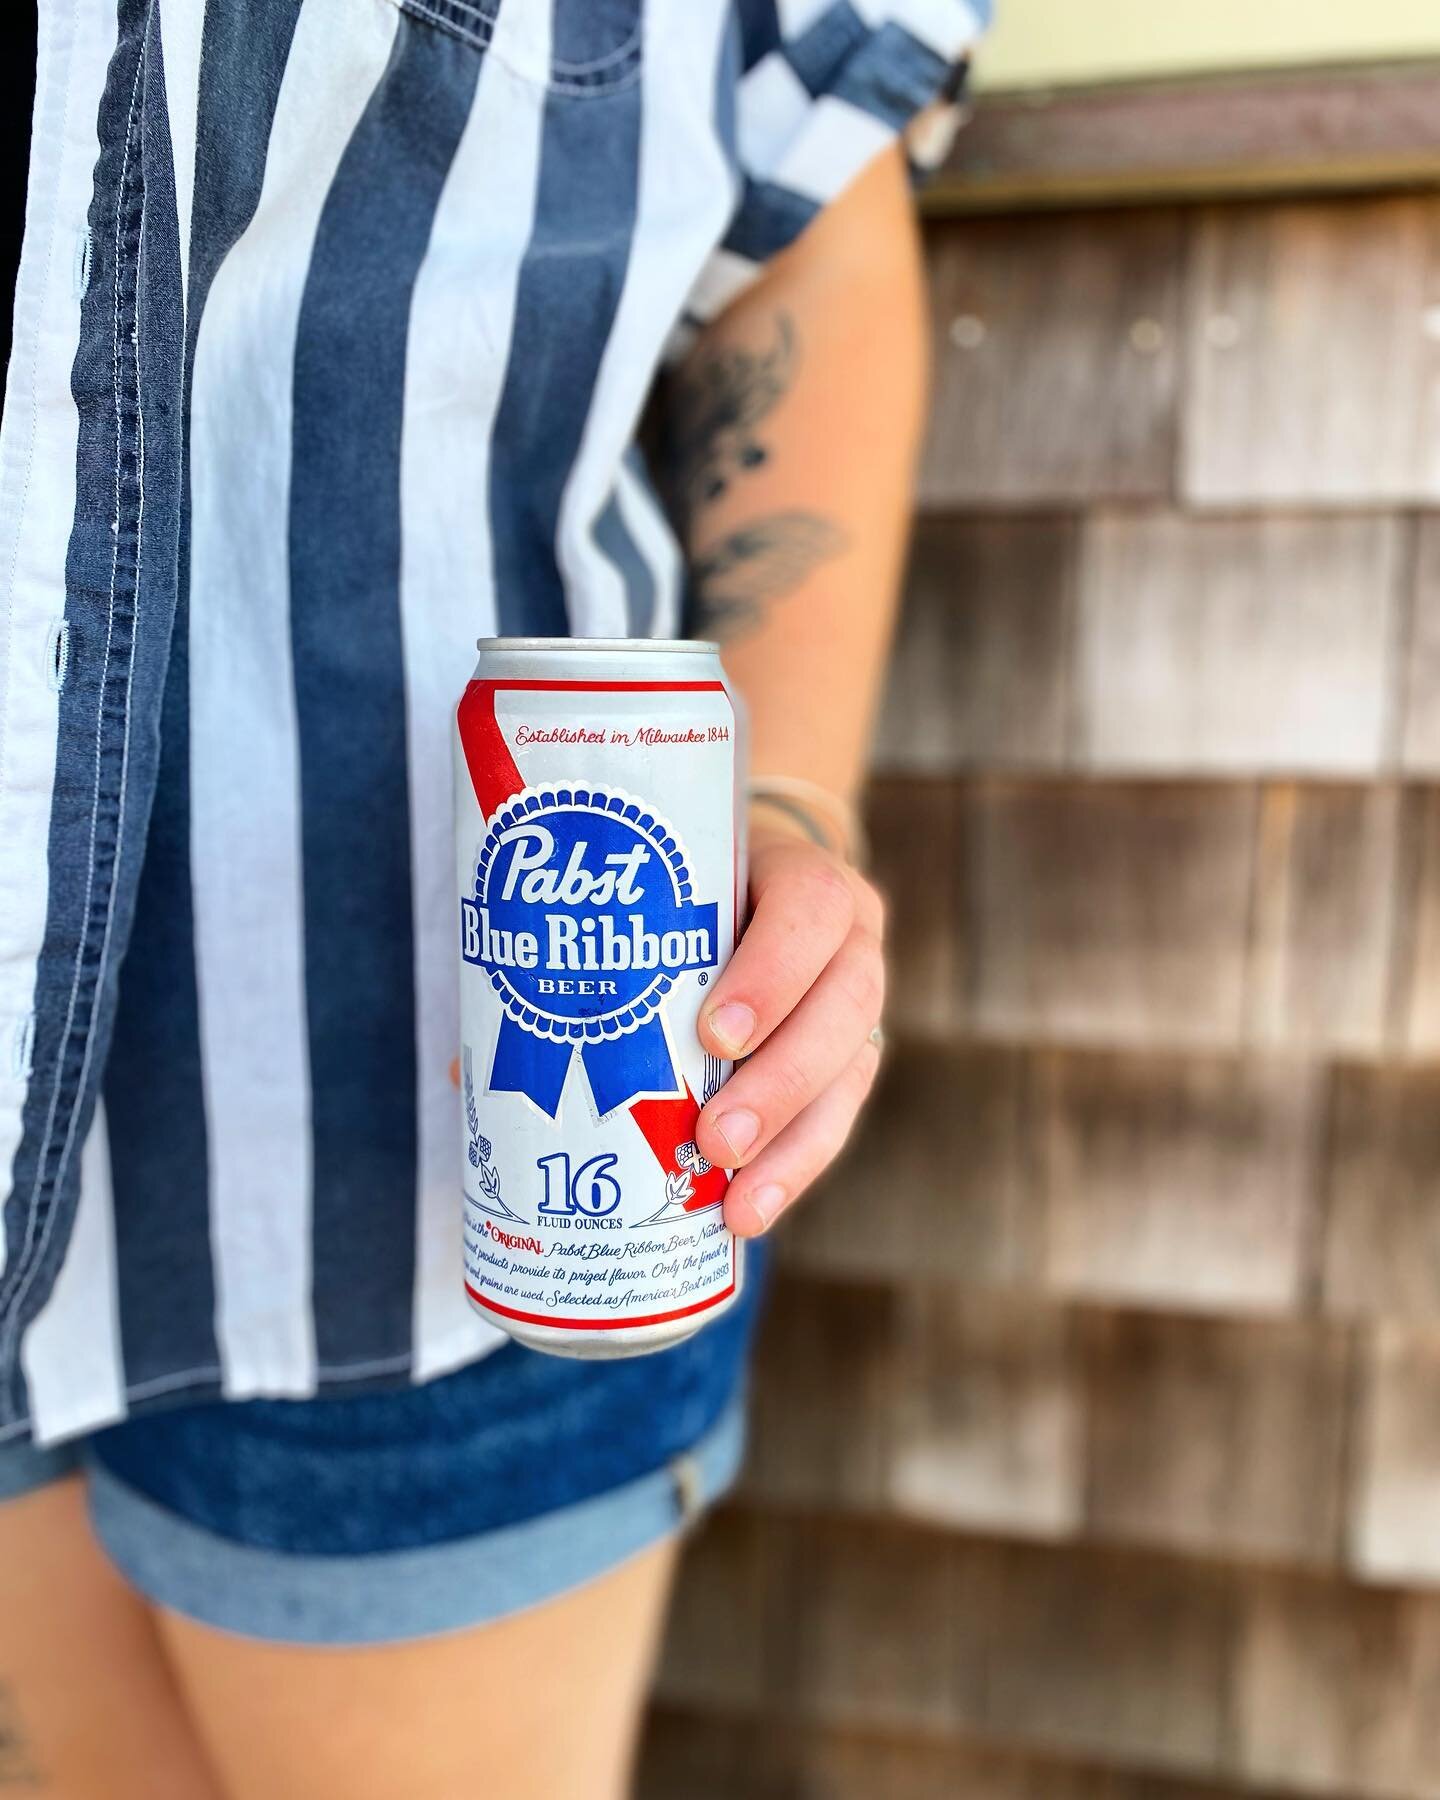 The weather may be unpredictable today, but one thing is certain&hellip; ice cold PBR at The Wisp! 🍺